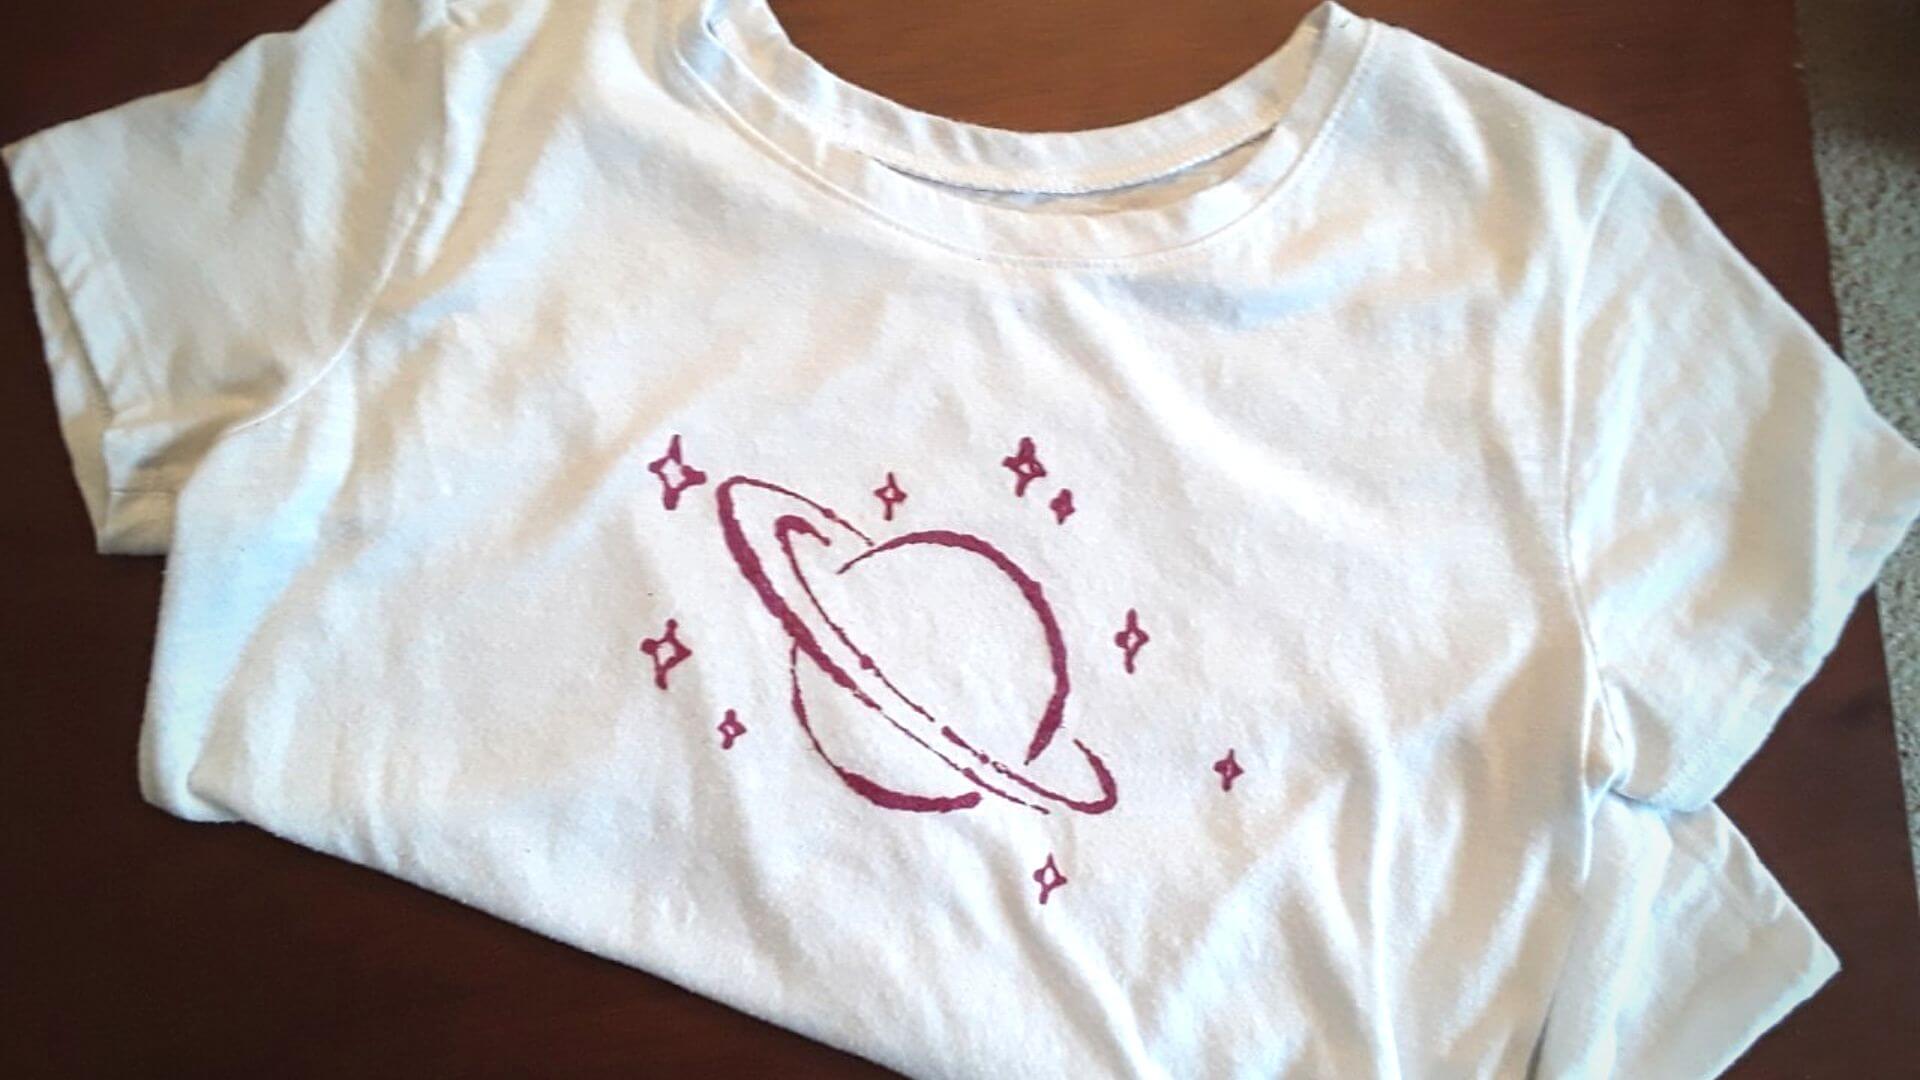 Upcycled t-shirt using puffy paint technique